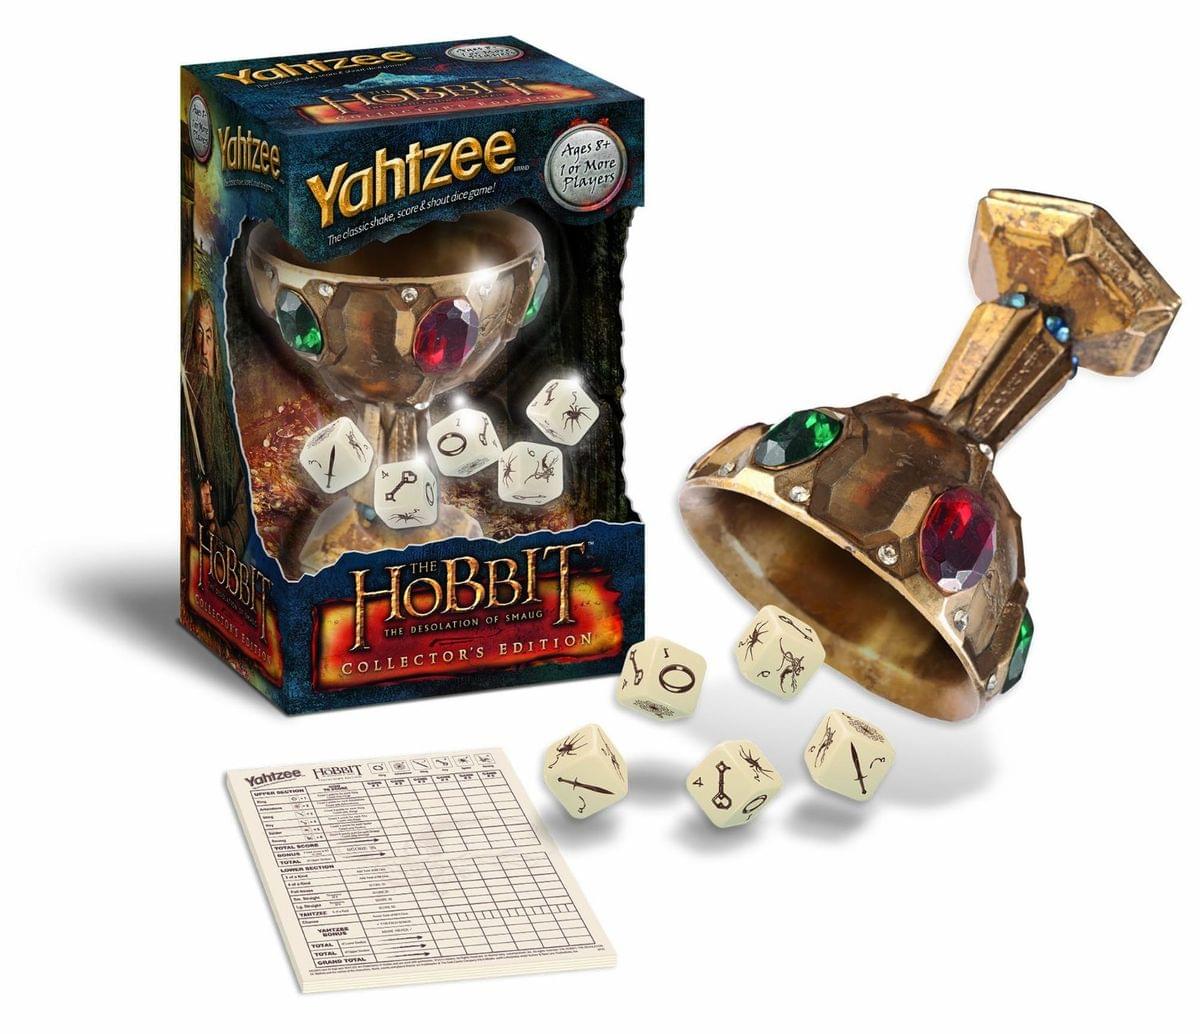 Yahtzee Dice Game: The Hobbit The Desolation Of Smaug Collector's Edition Game